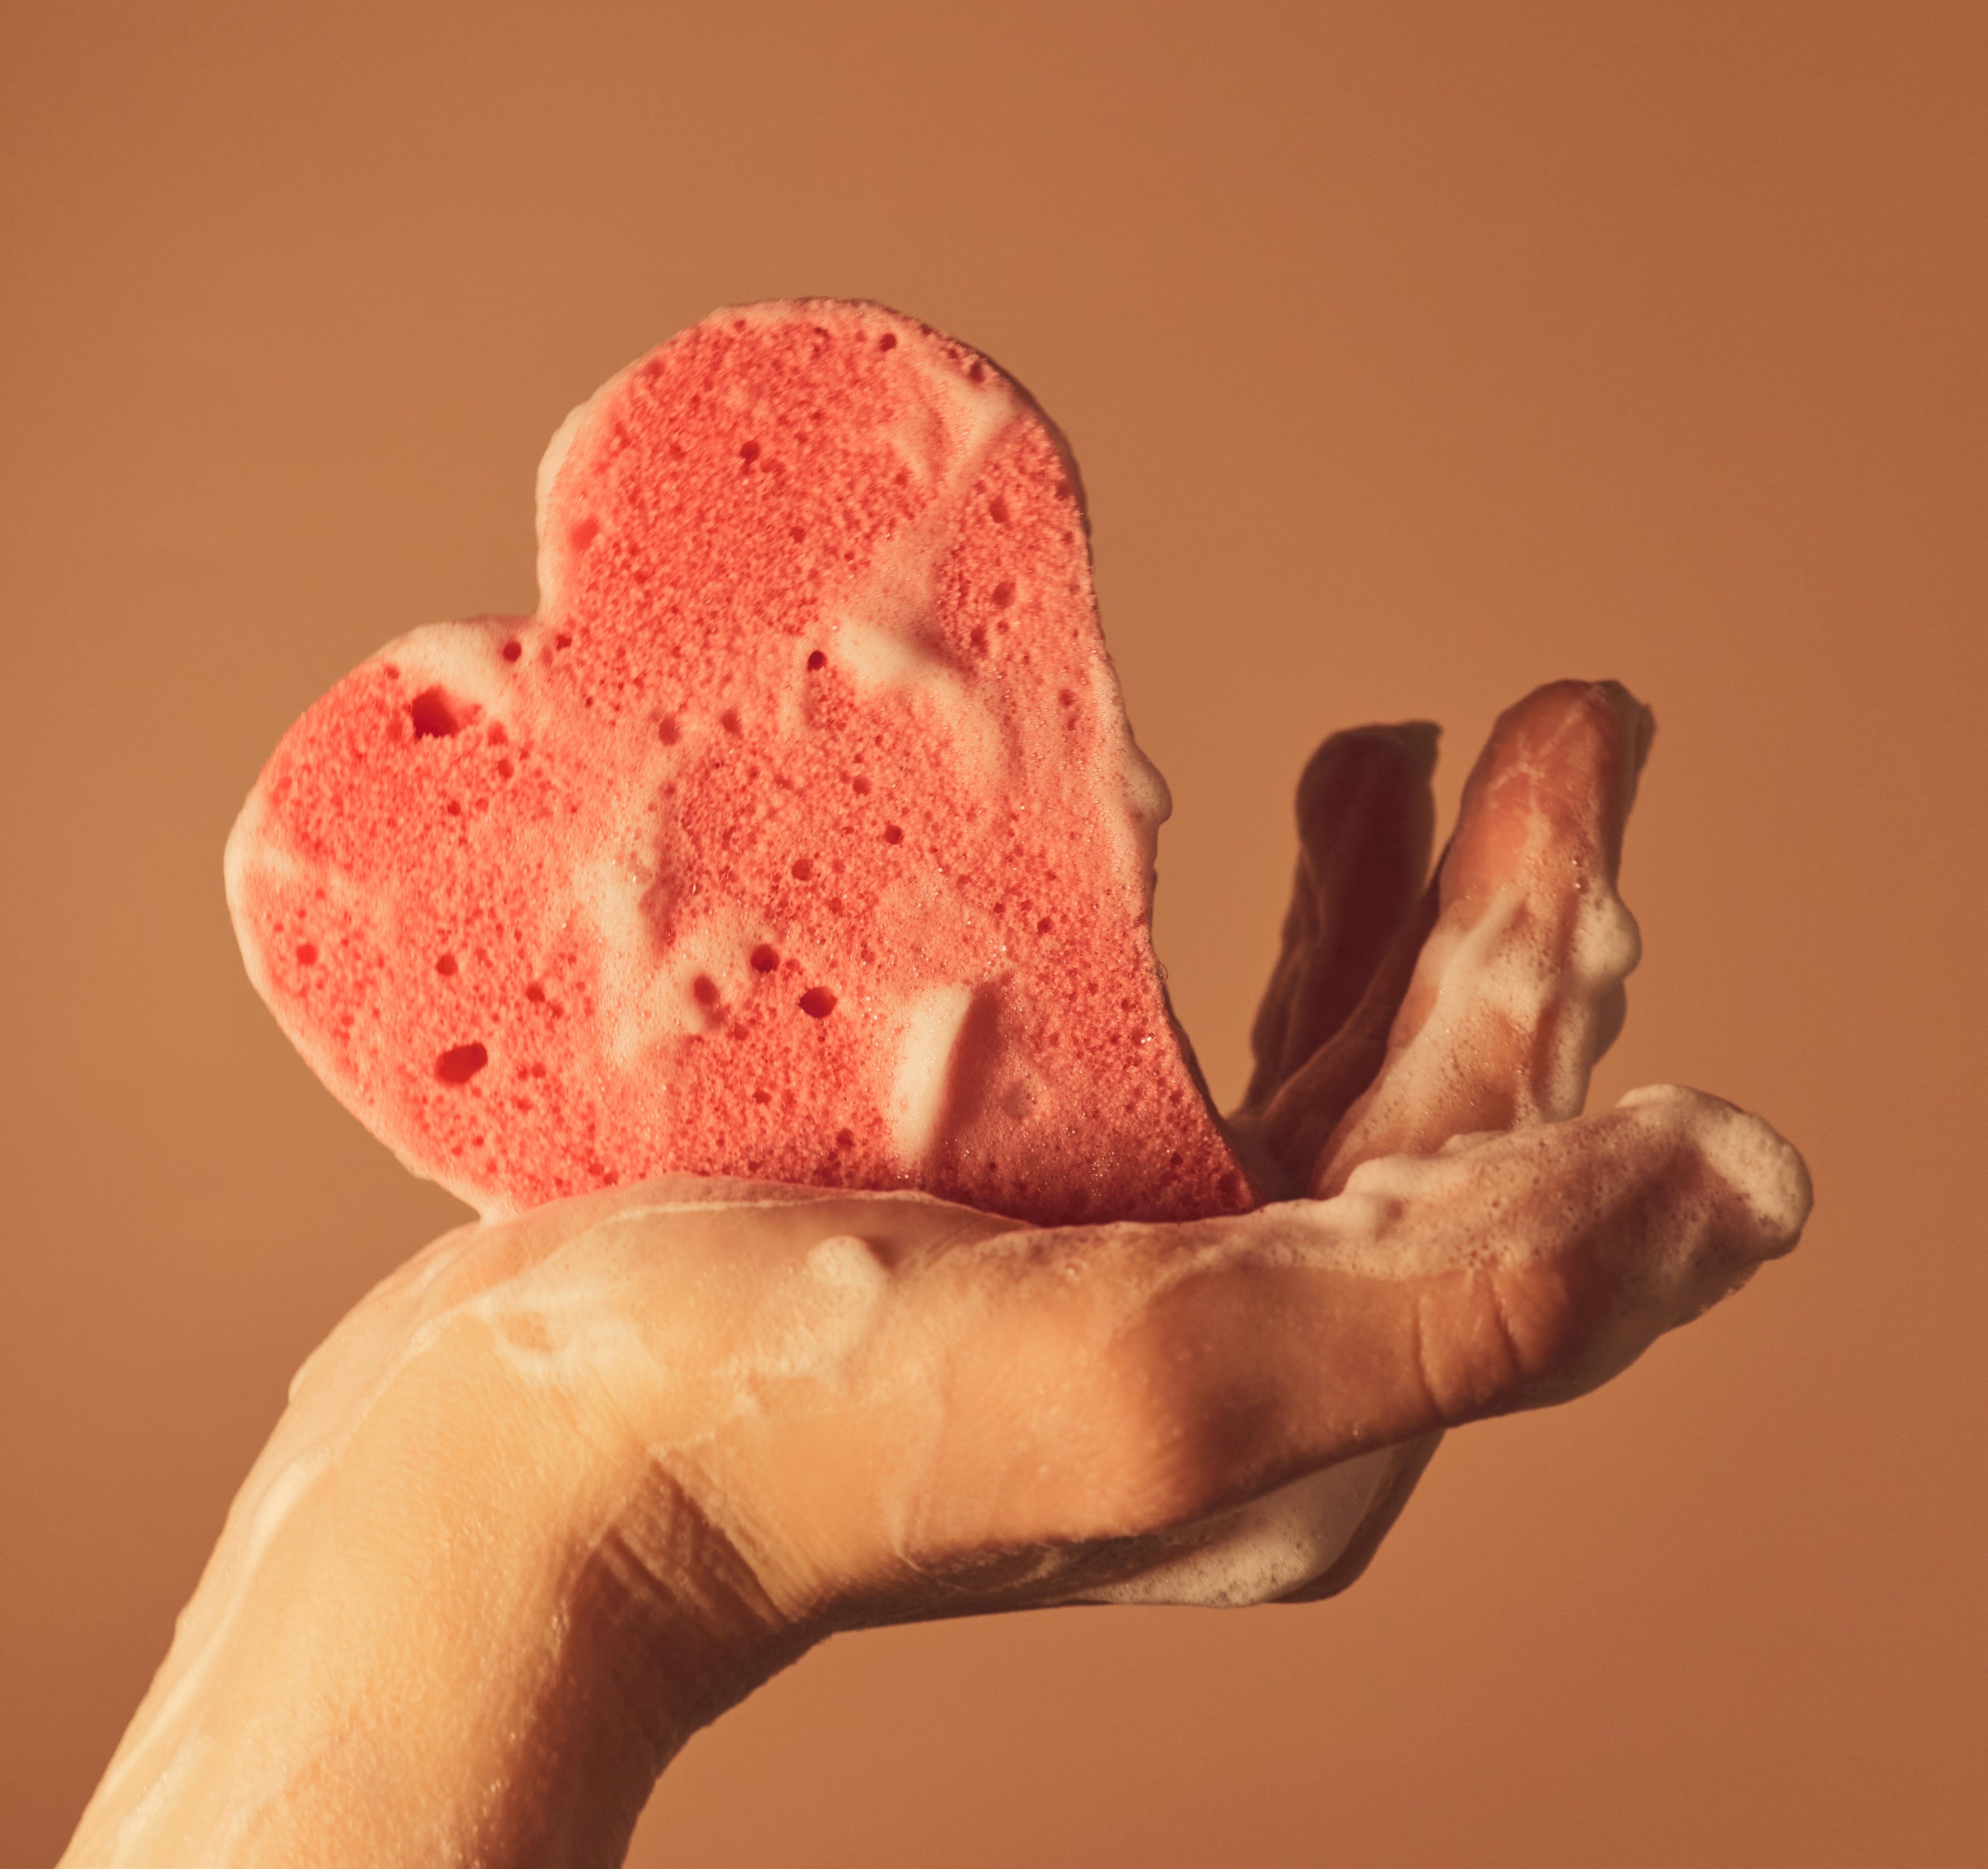 Image of a hand holding a pink sponge that is shaped like a heart with soap suds on it.